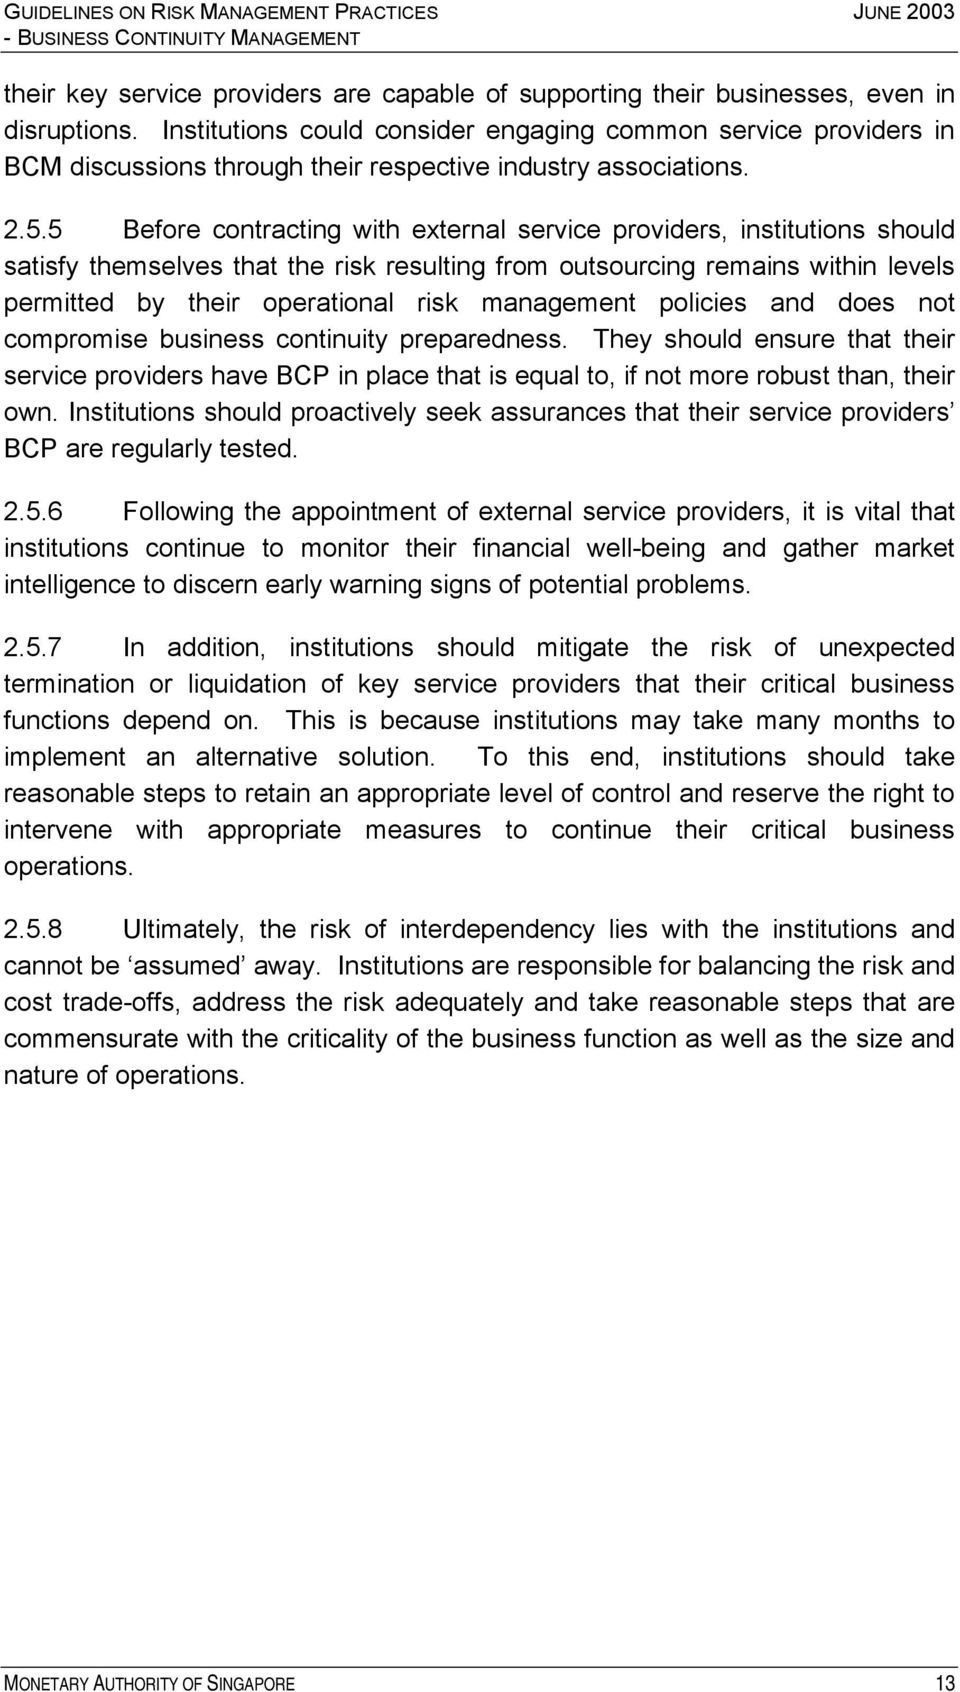 5 Before contracting with external service providers, institutions should satisfy themselves that the risk resulting from outsourcing remains within levels permitted by their operational risk